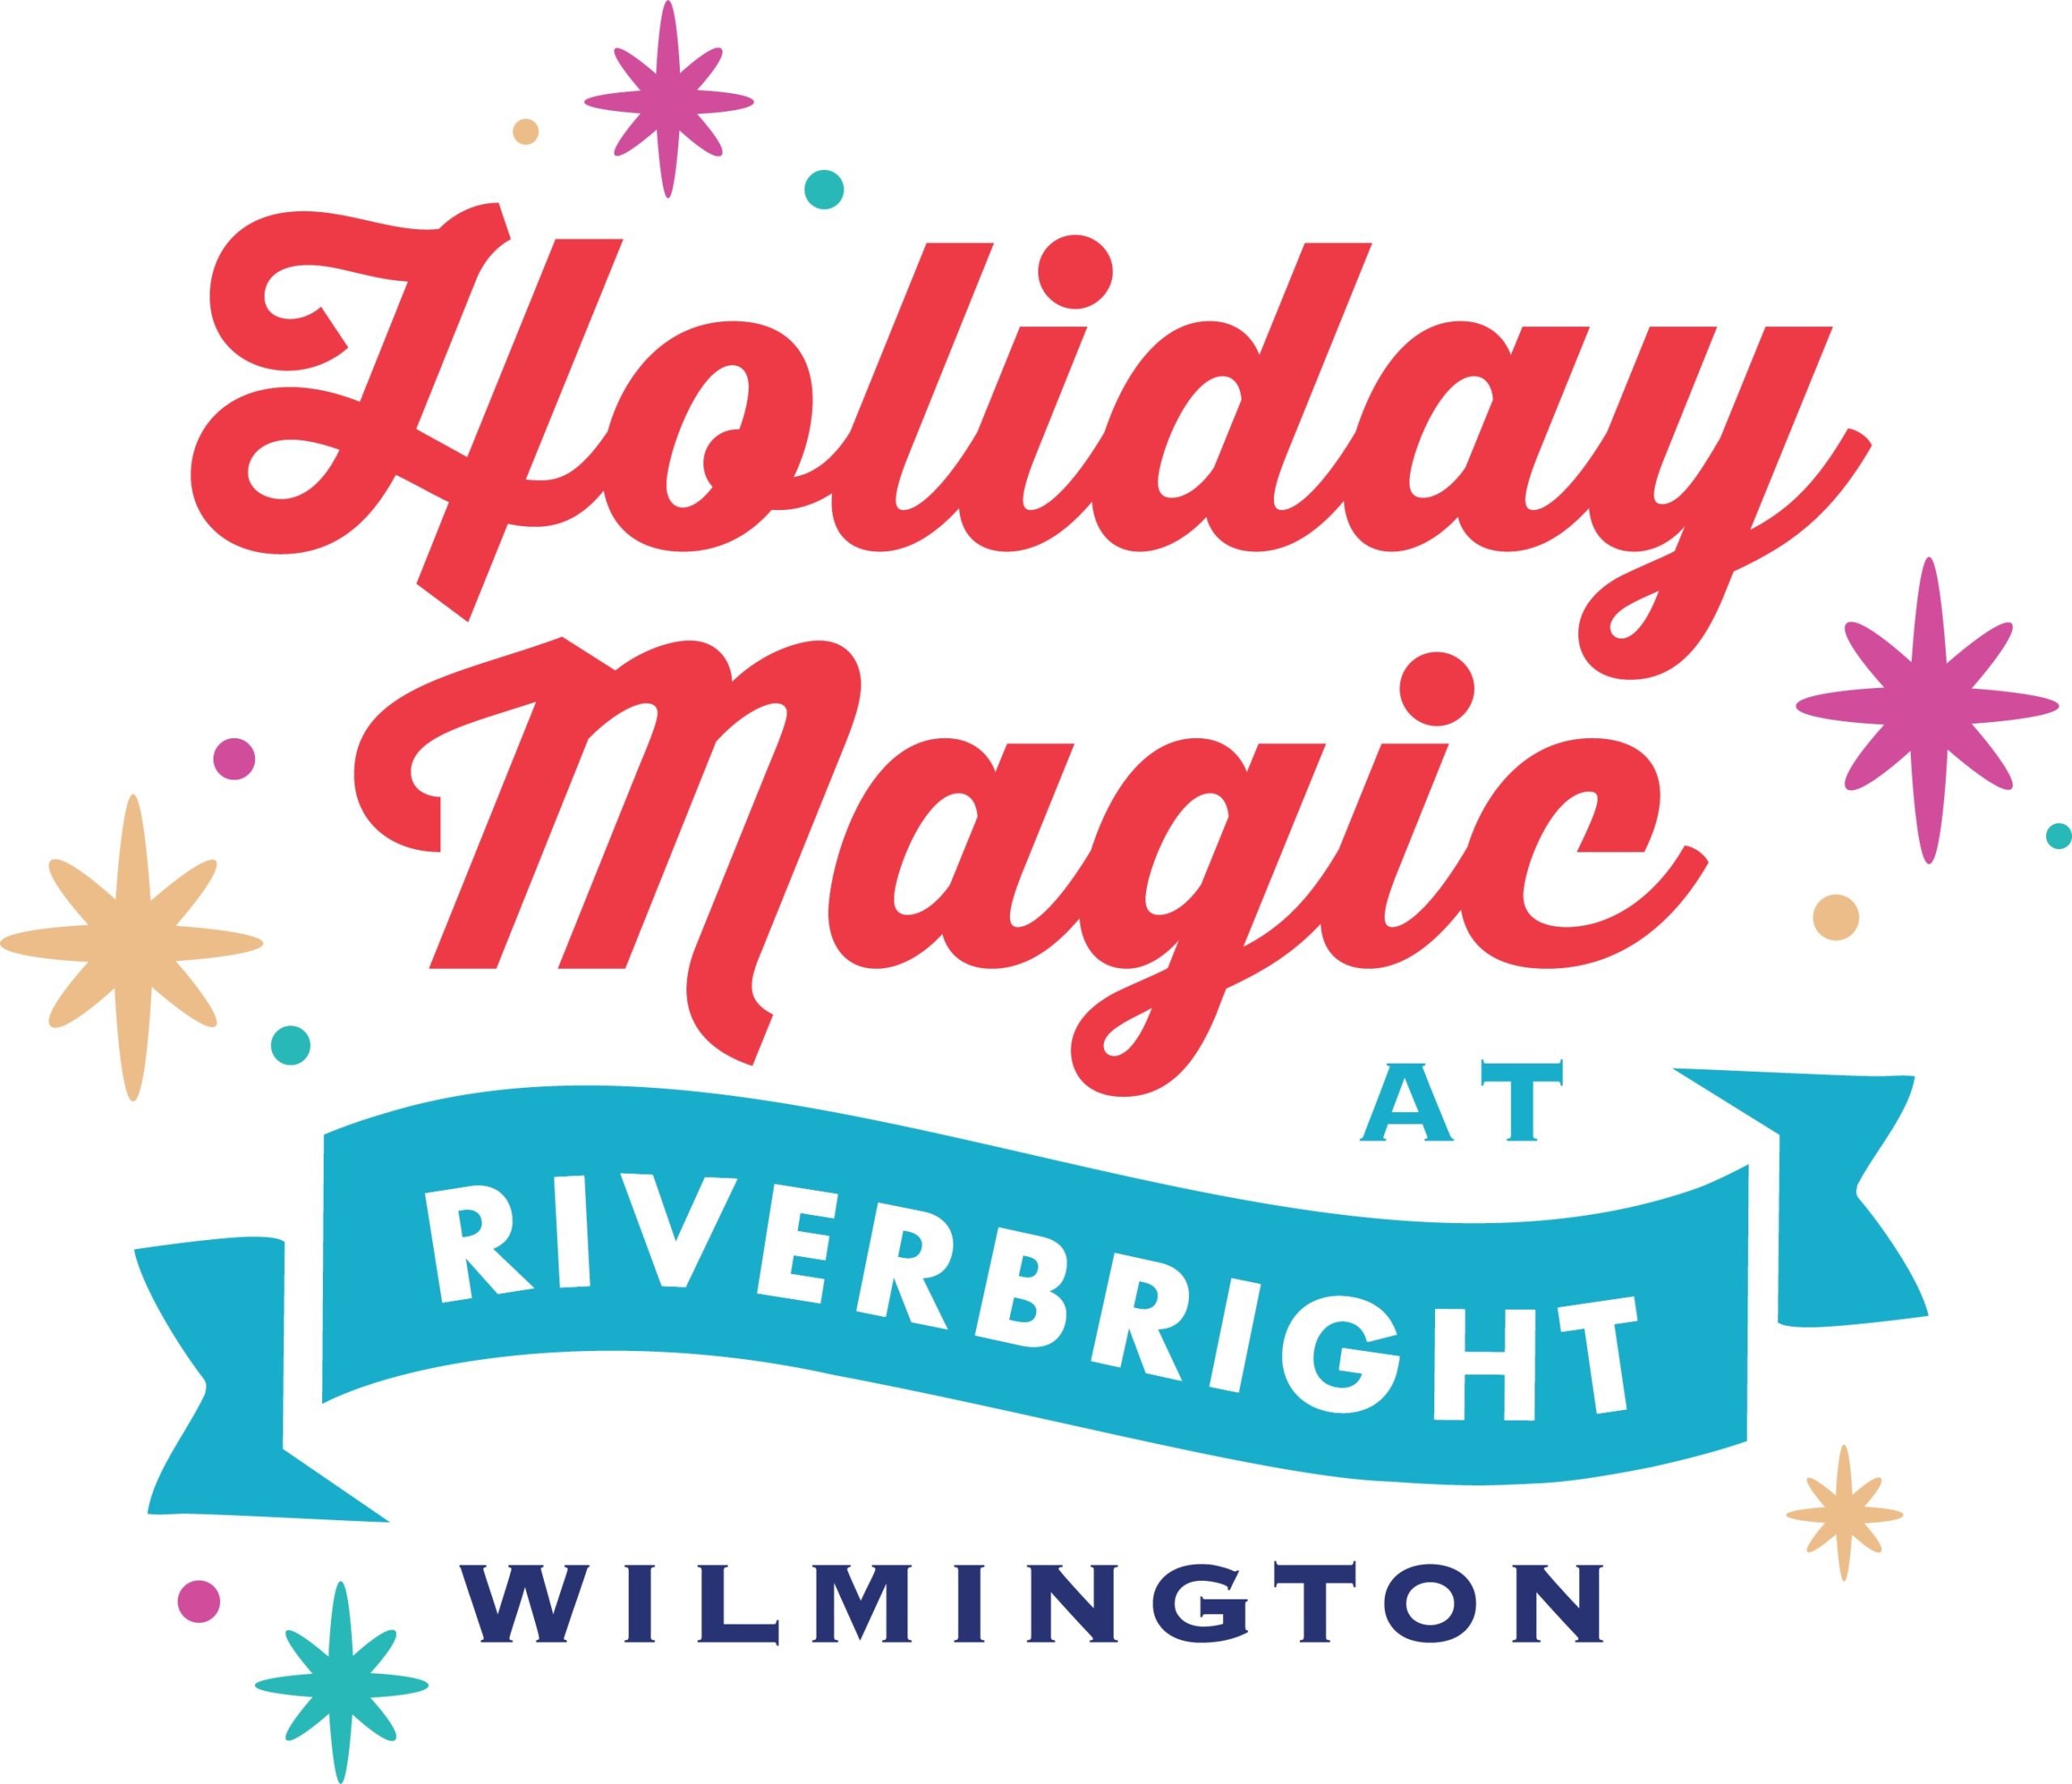 New Year’s Eve Fireworks Return to Riverfront Wilmington!-RESCHEDULED FOR JANUARY 1st!